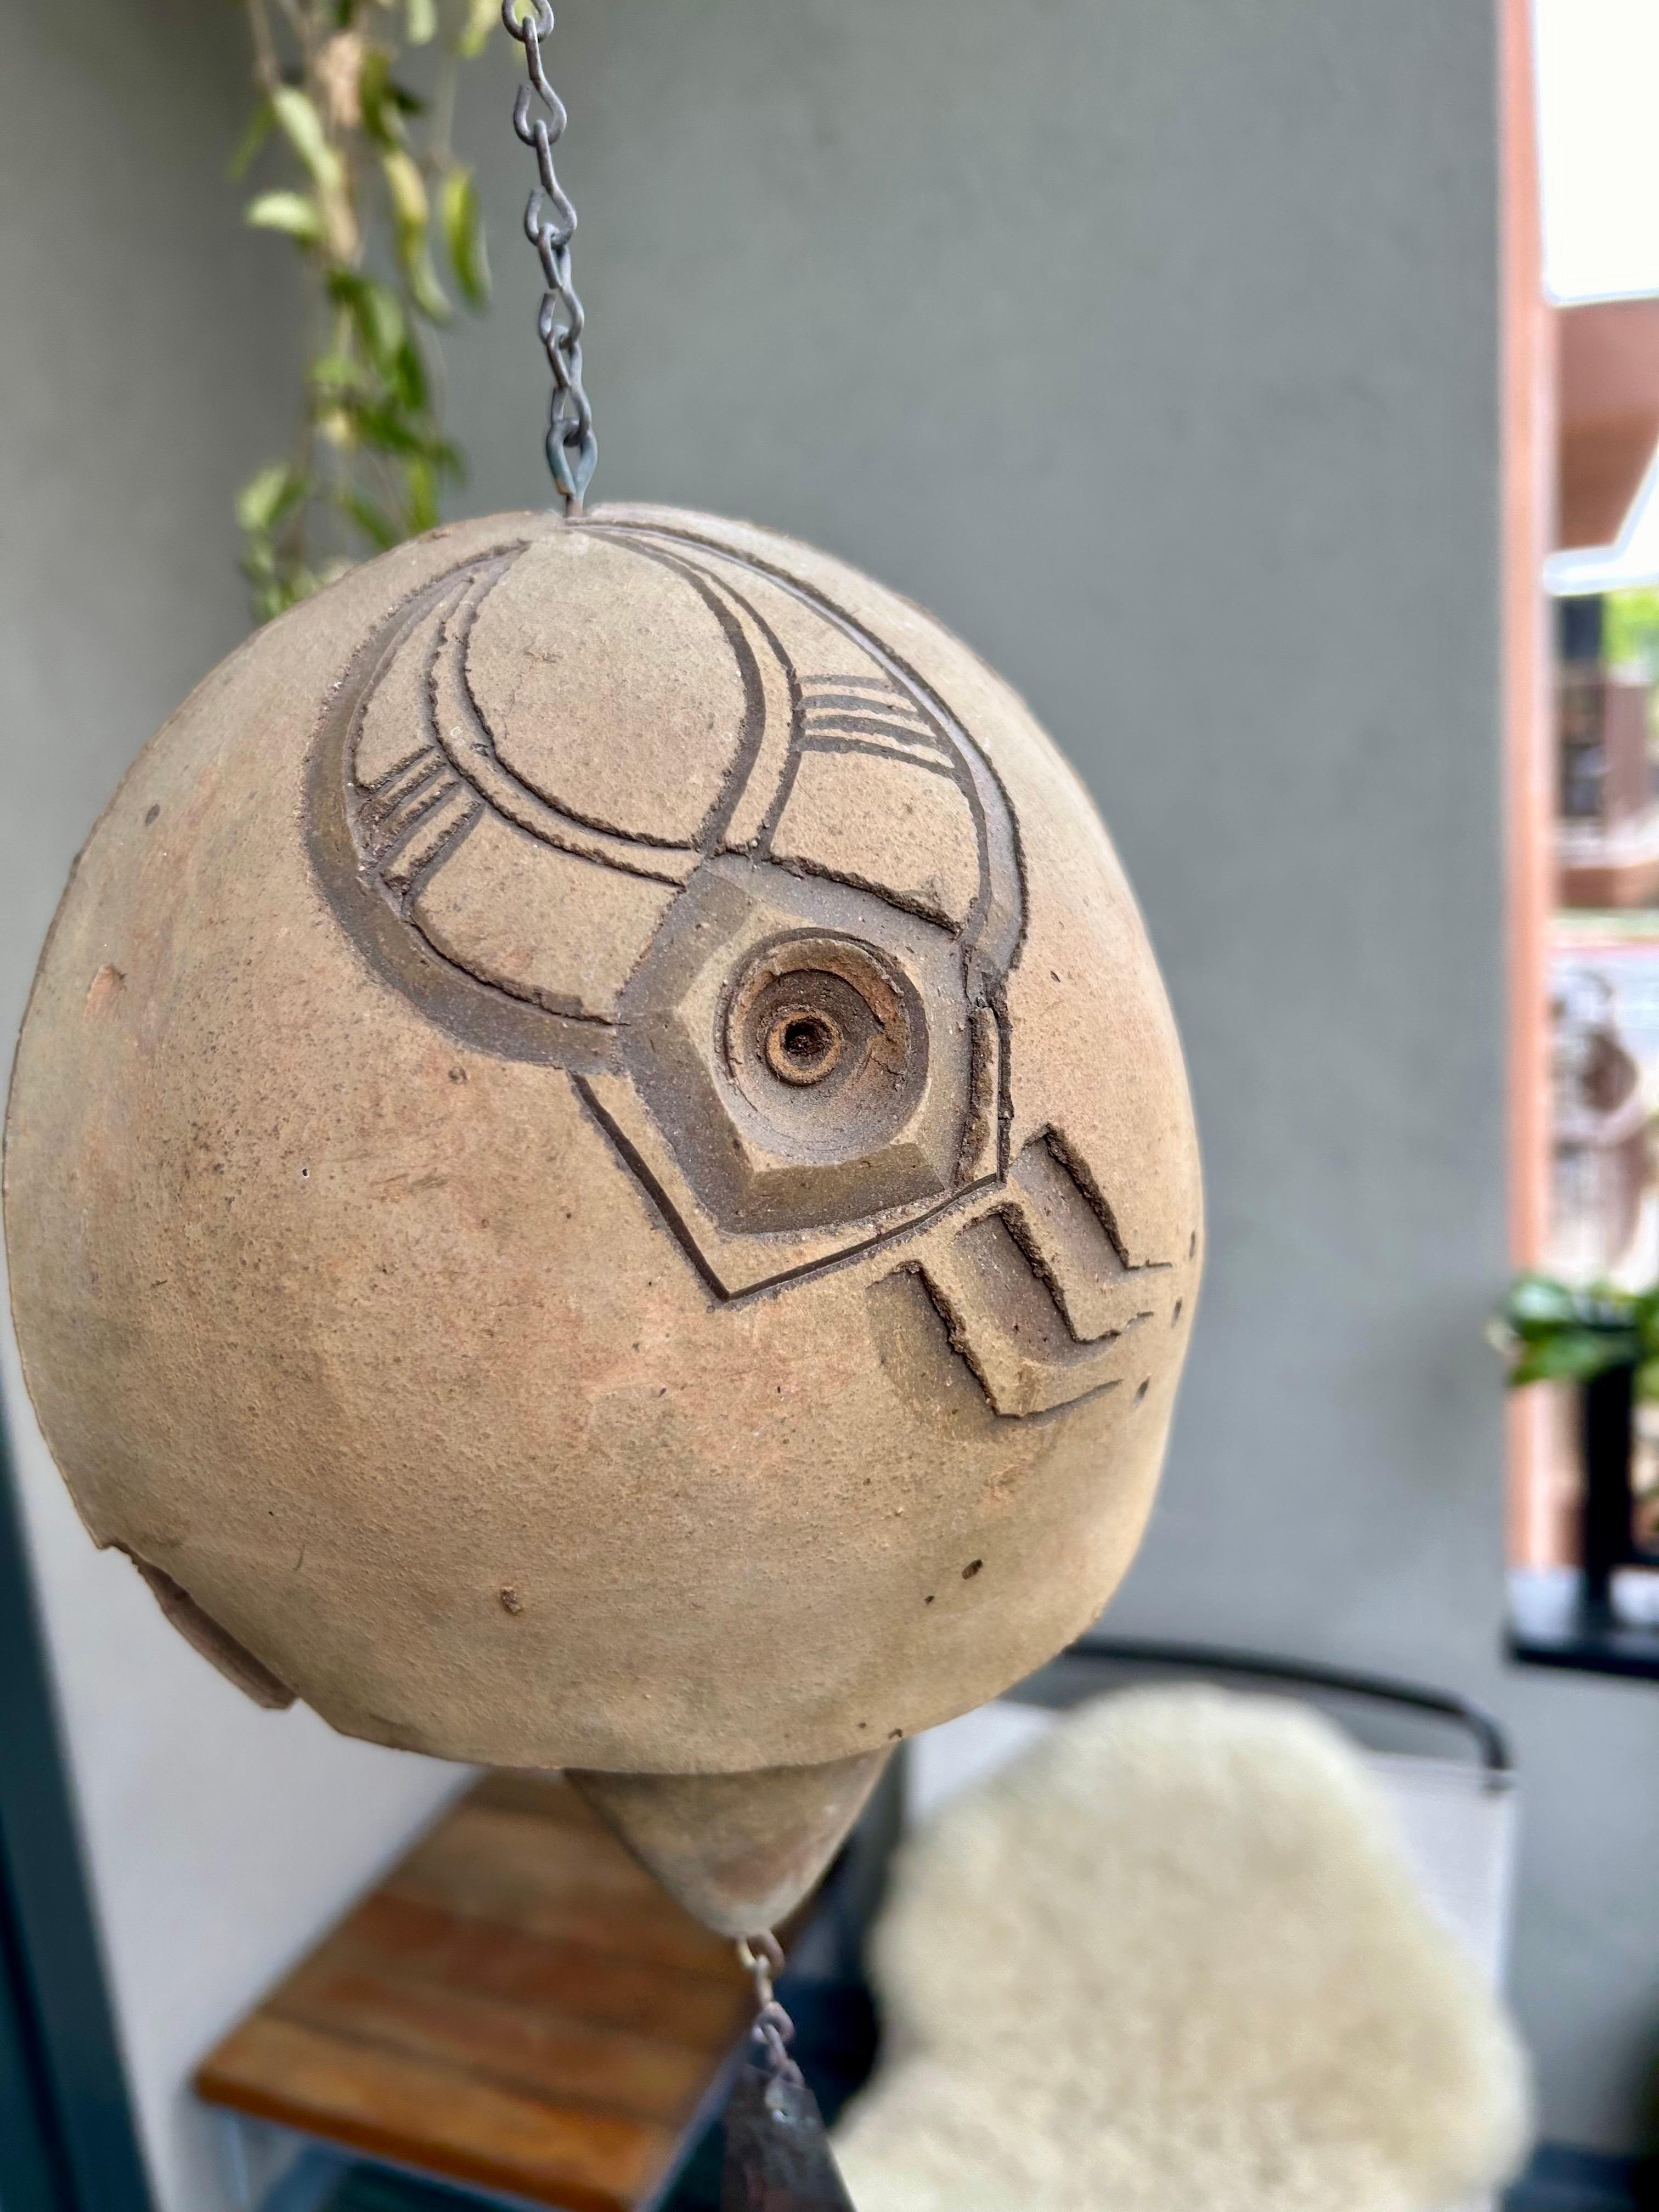 Nice ceramic wind bell.
No two are exactly alike.
Made at the Arcosanti studios in Arizona.
Normal wear and patina.
No chips, cracks or repairs.
Great for any environment and collections.
